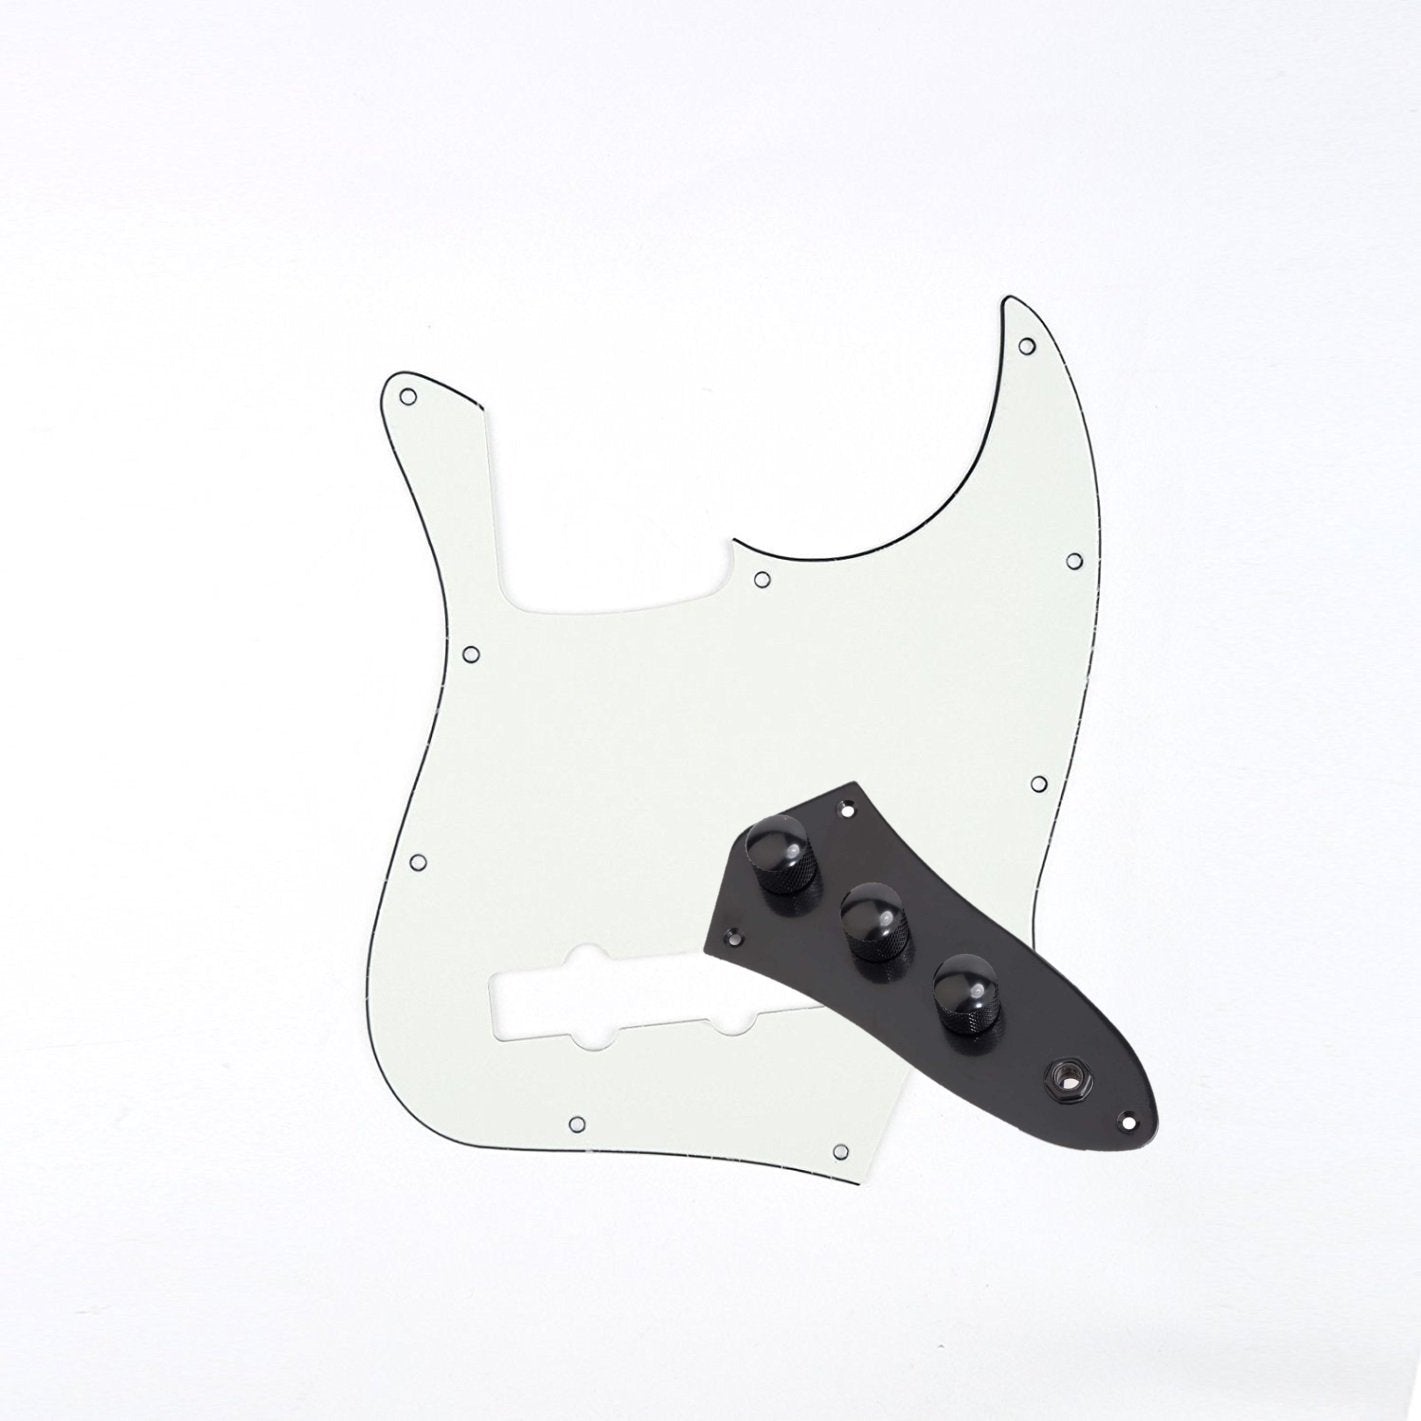 Jazz Bass Guitar Pickguard and Wired Control Plate Bundle